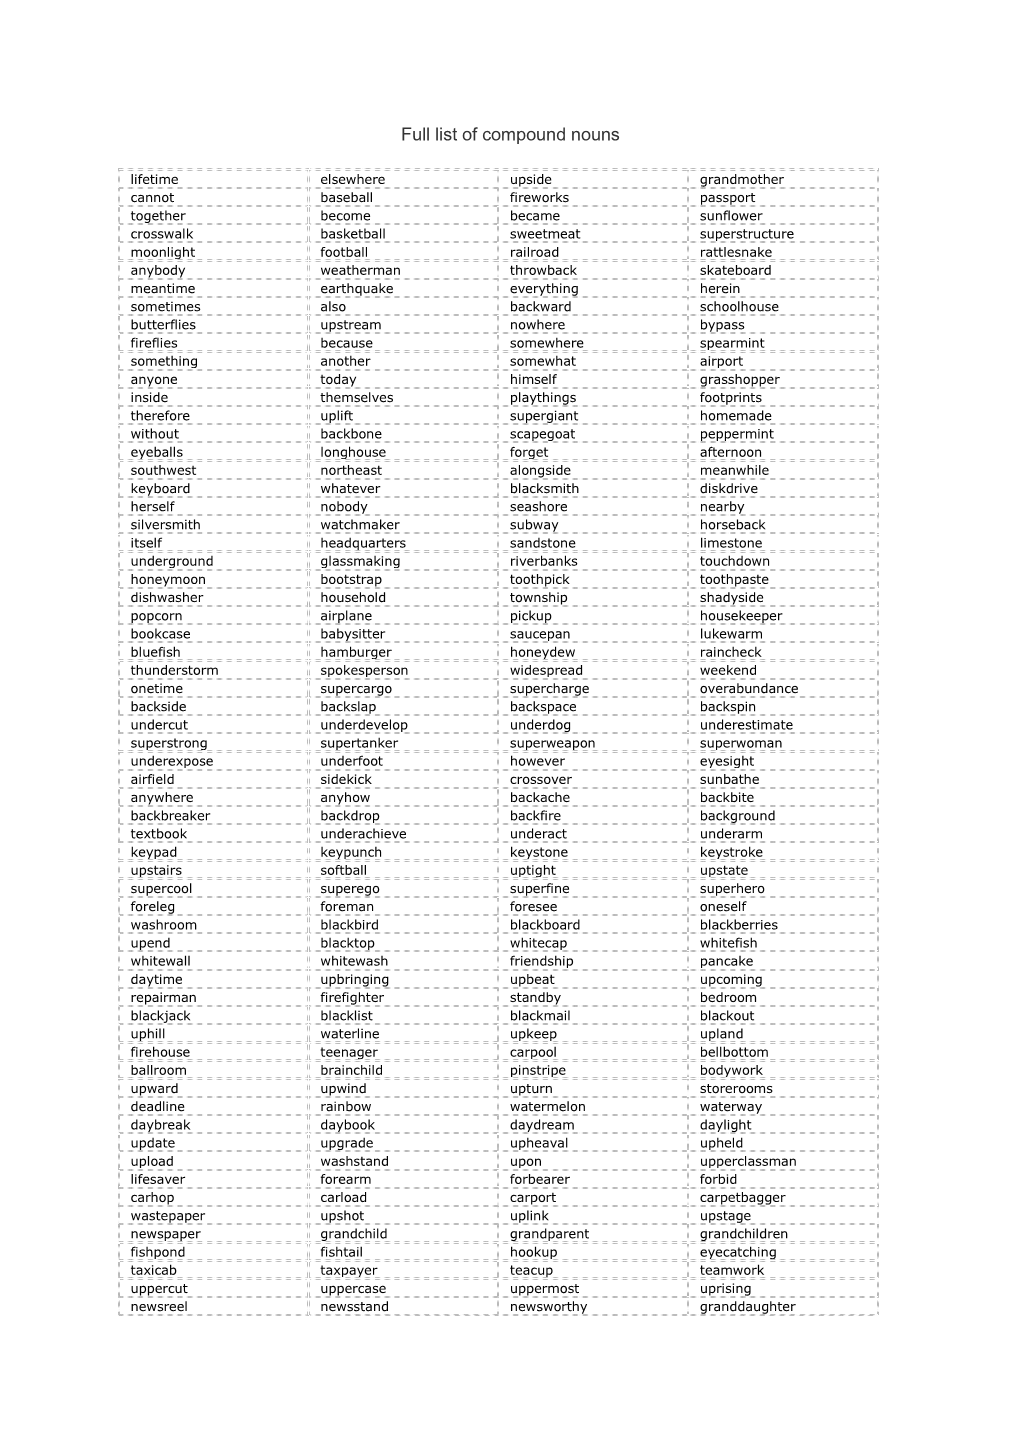 Full List of Compound Nouns